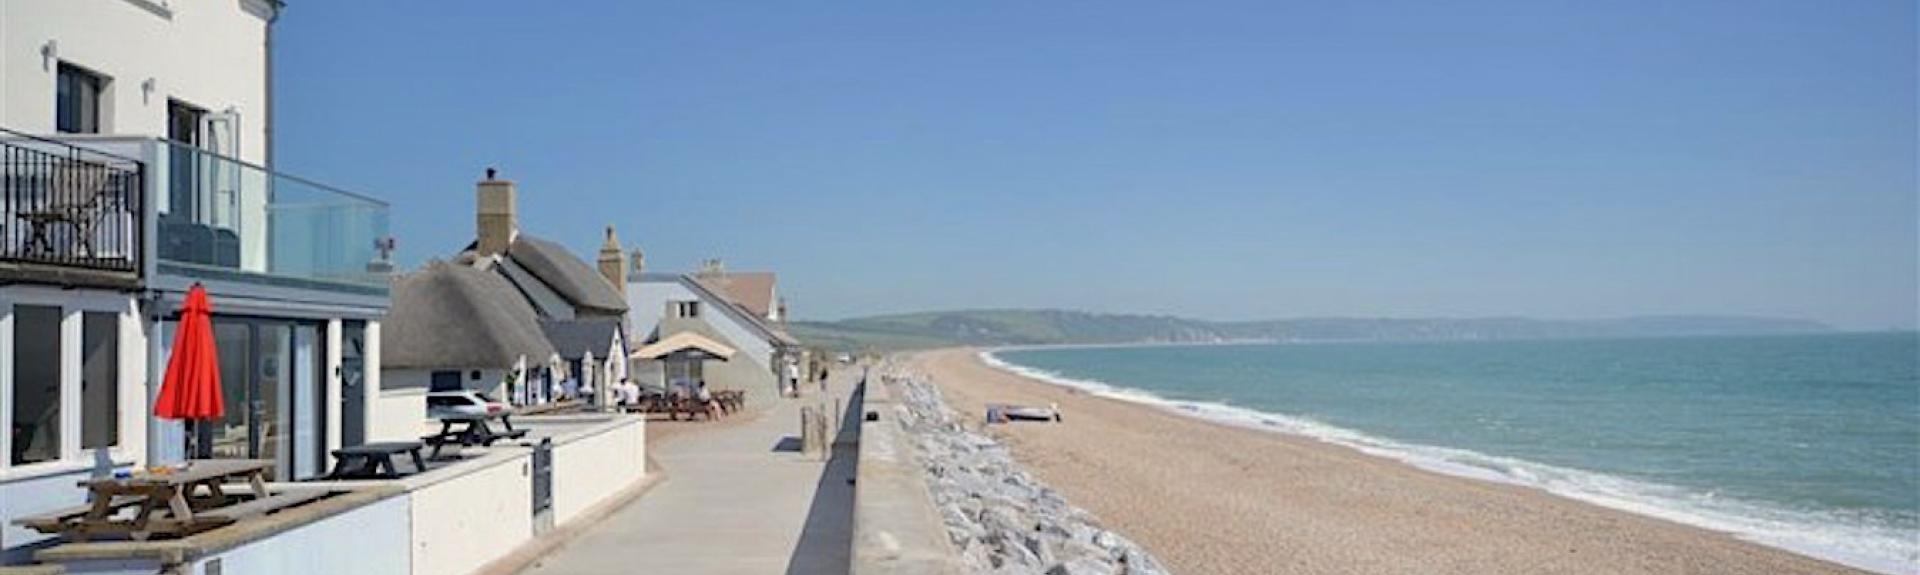 A holiday apartment overlooks a long sandy beach in South DEvon.